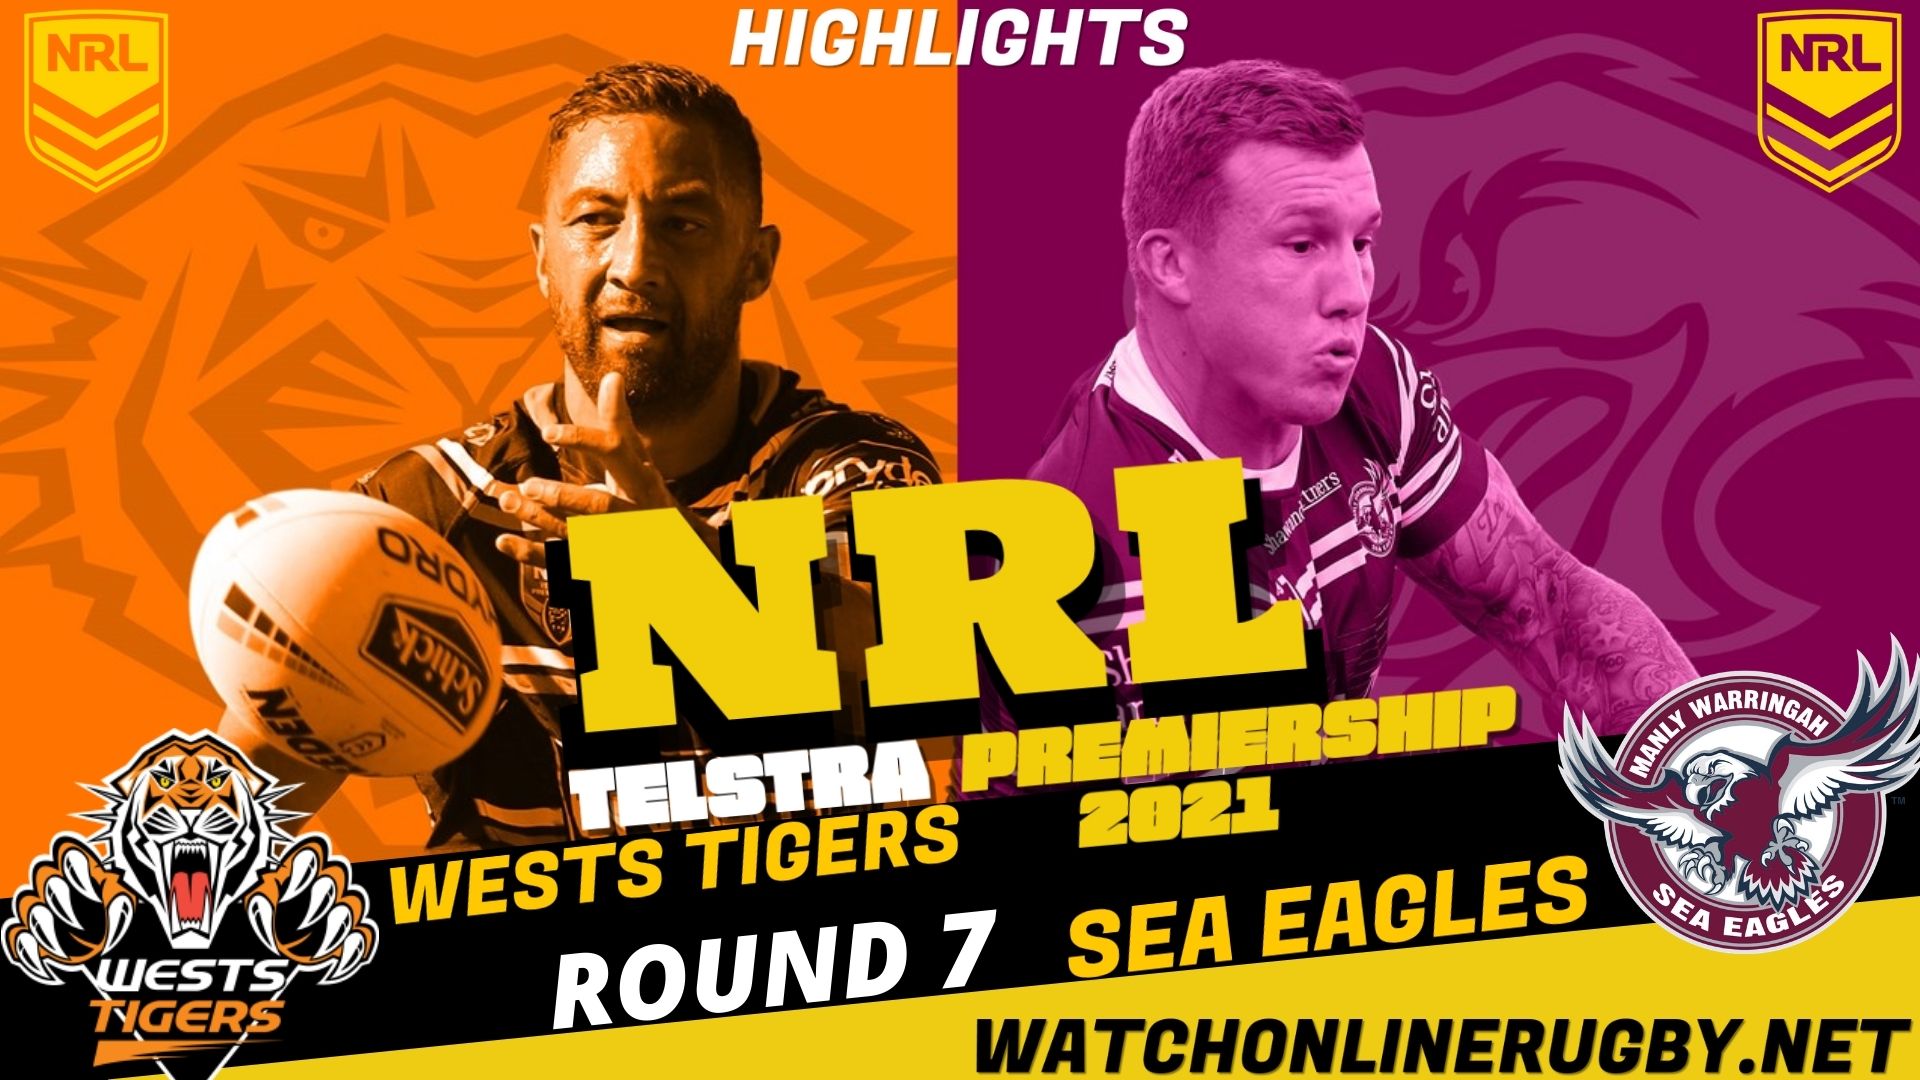 Wests Tigers Vs Sea Eagles Highlights RD 7 NRL Rugby